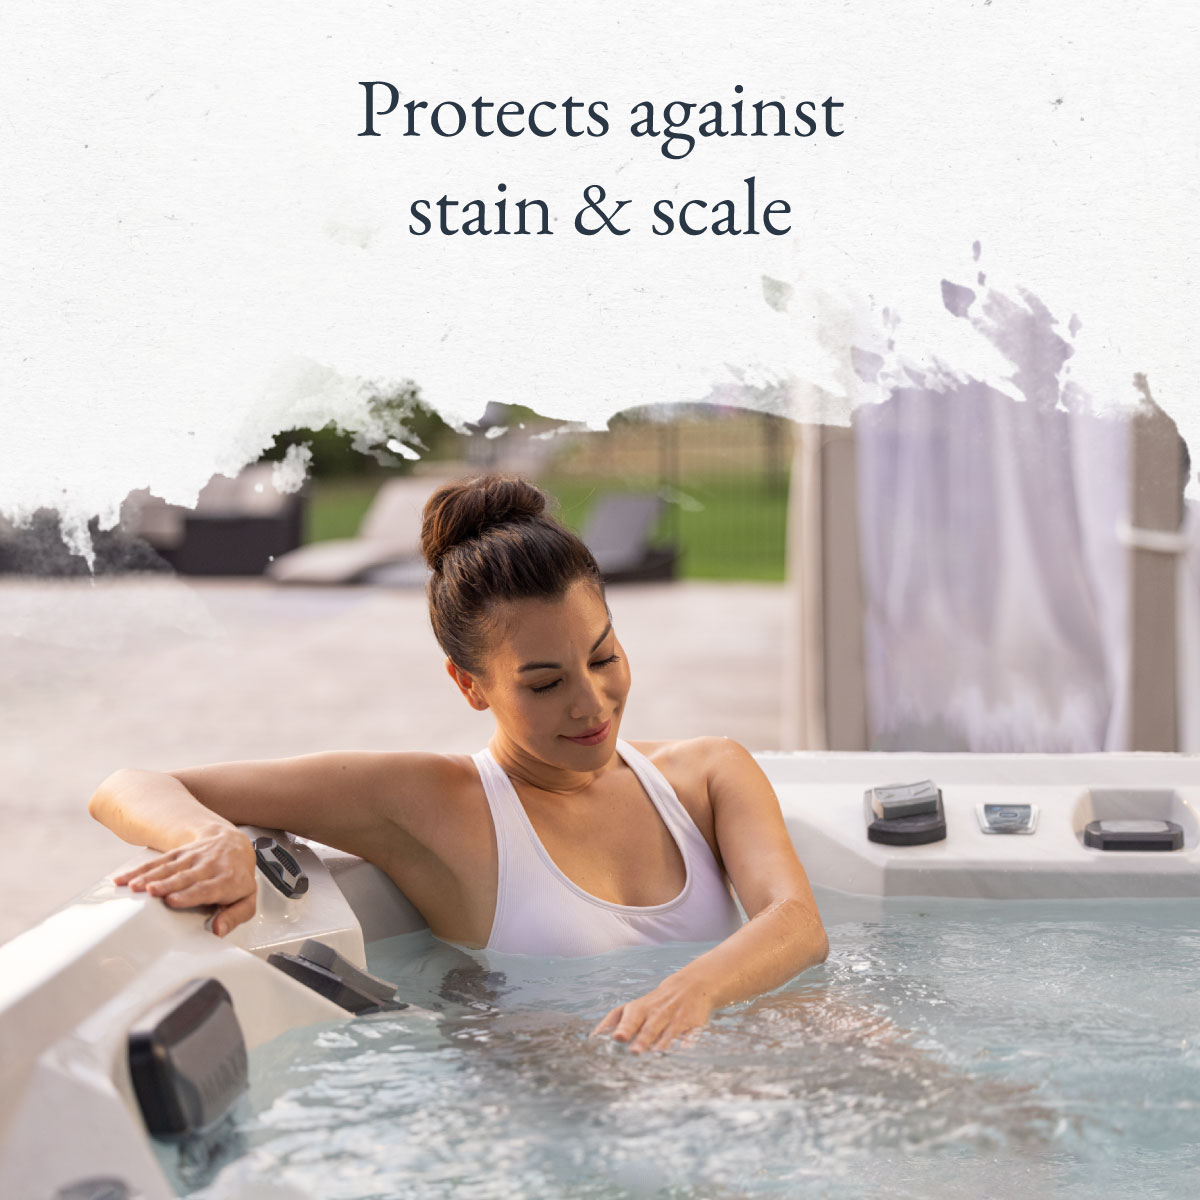 Protects against stain & scale